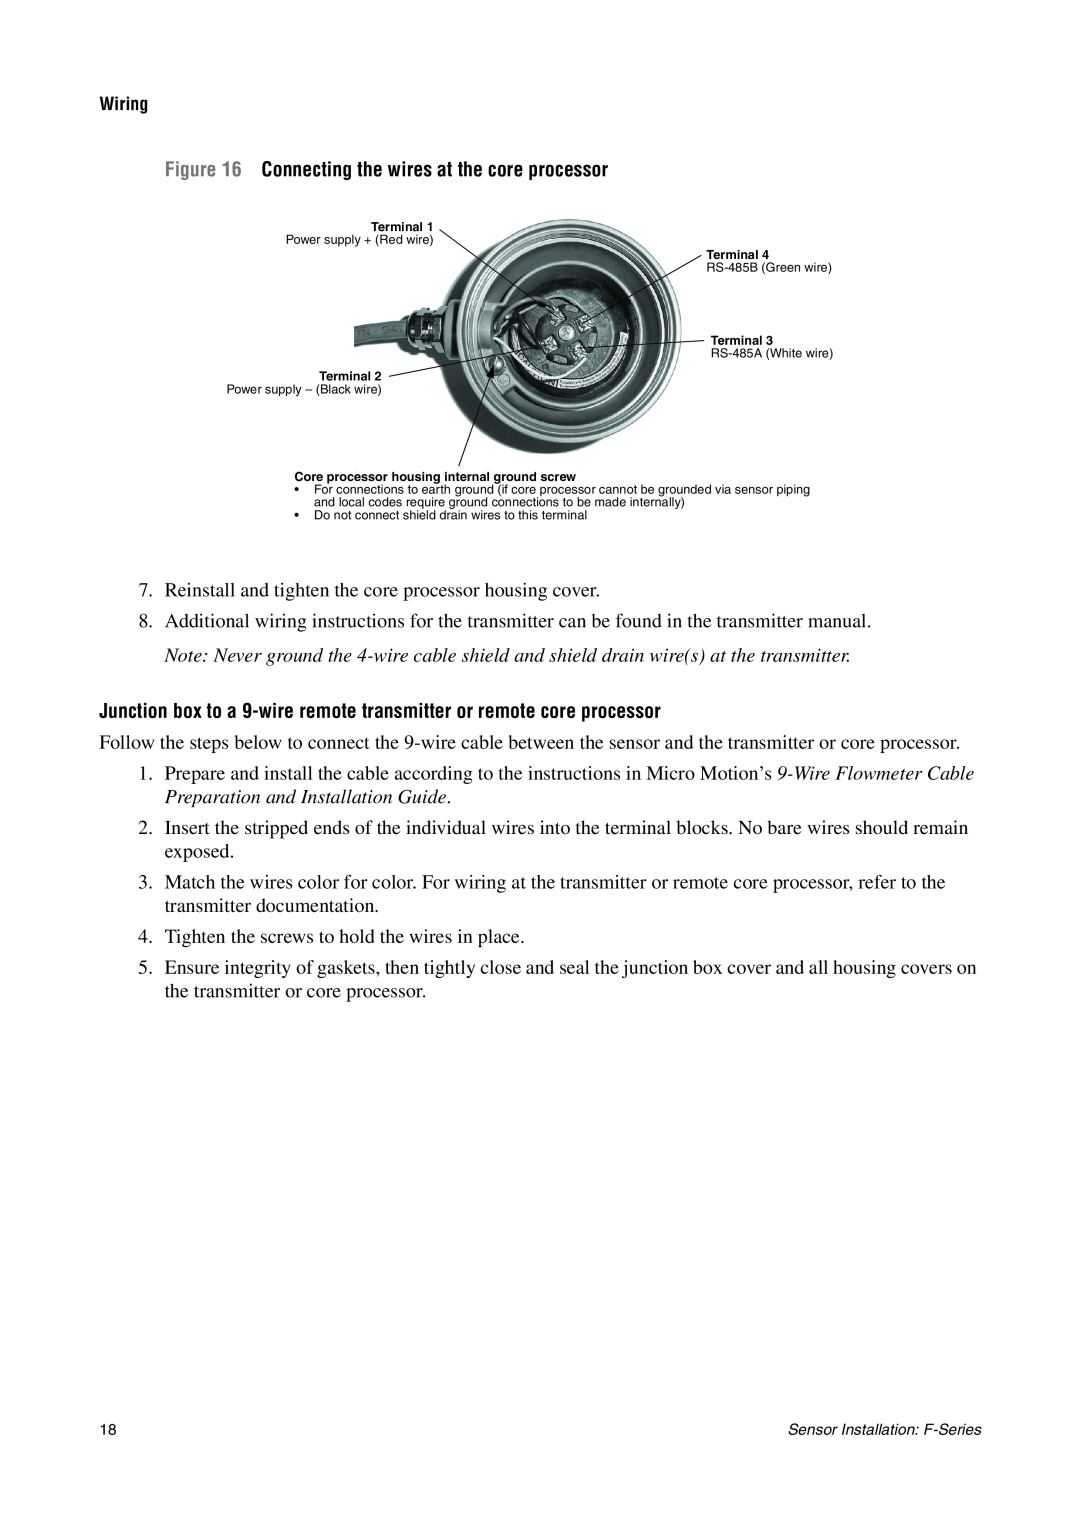 Emerson F-SERIES SENSOR installation manual Tighten the screws to hold the wires in place 